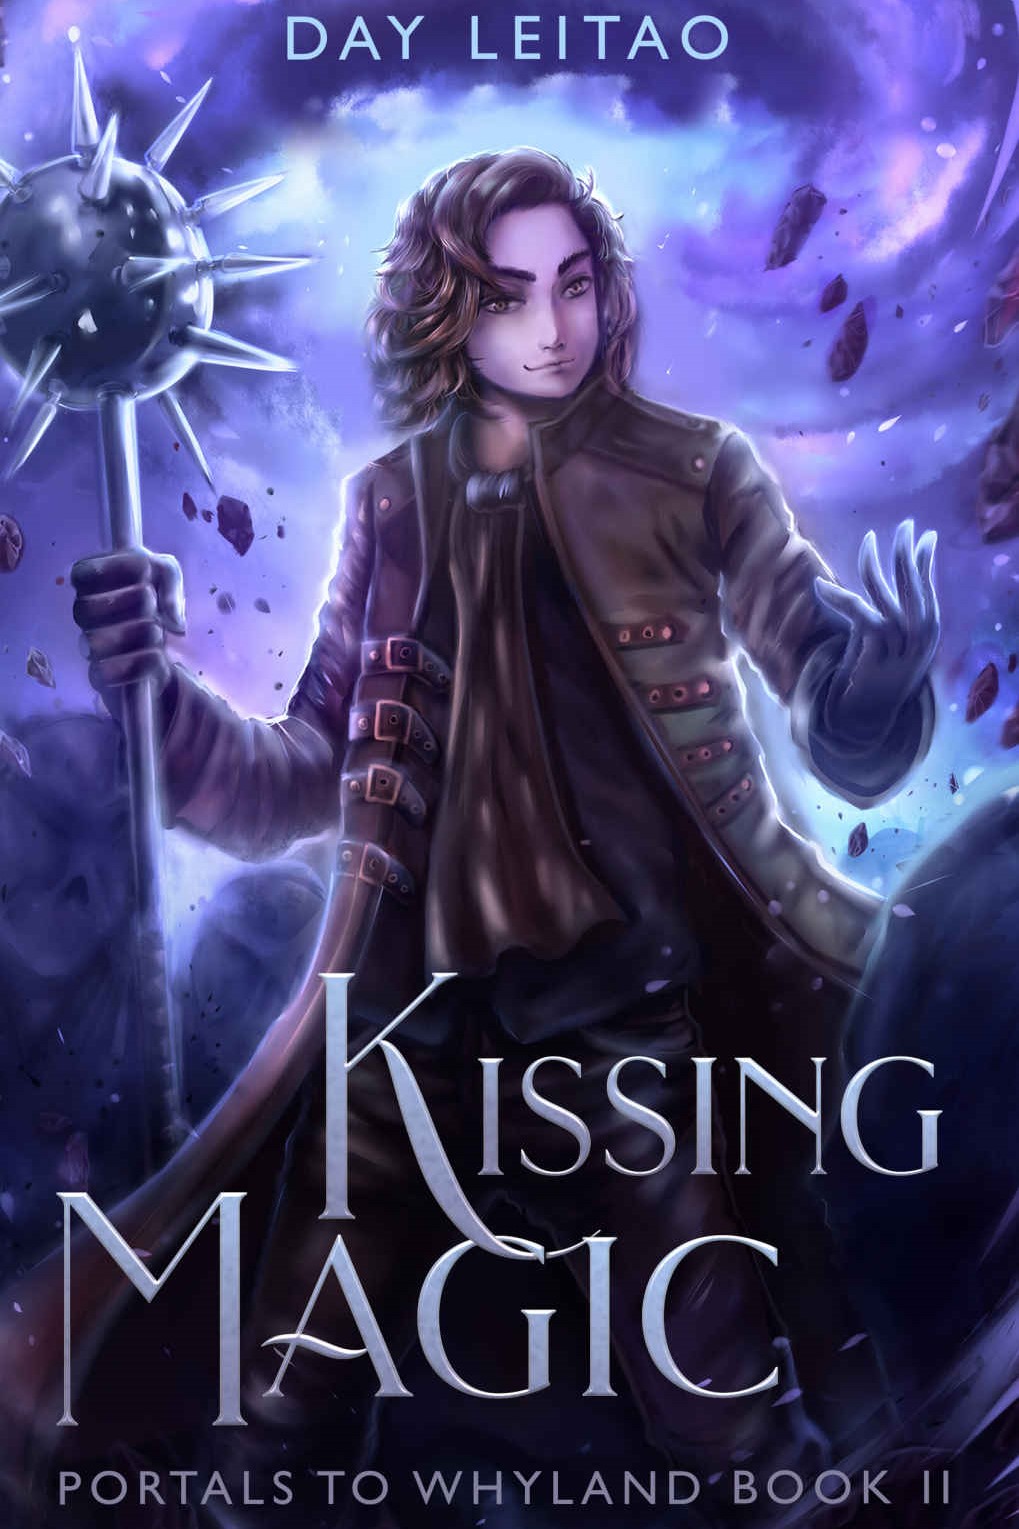 You are currently viewing Kissing Magic (Portals to Whyland Book 2) – Day Leitao